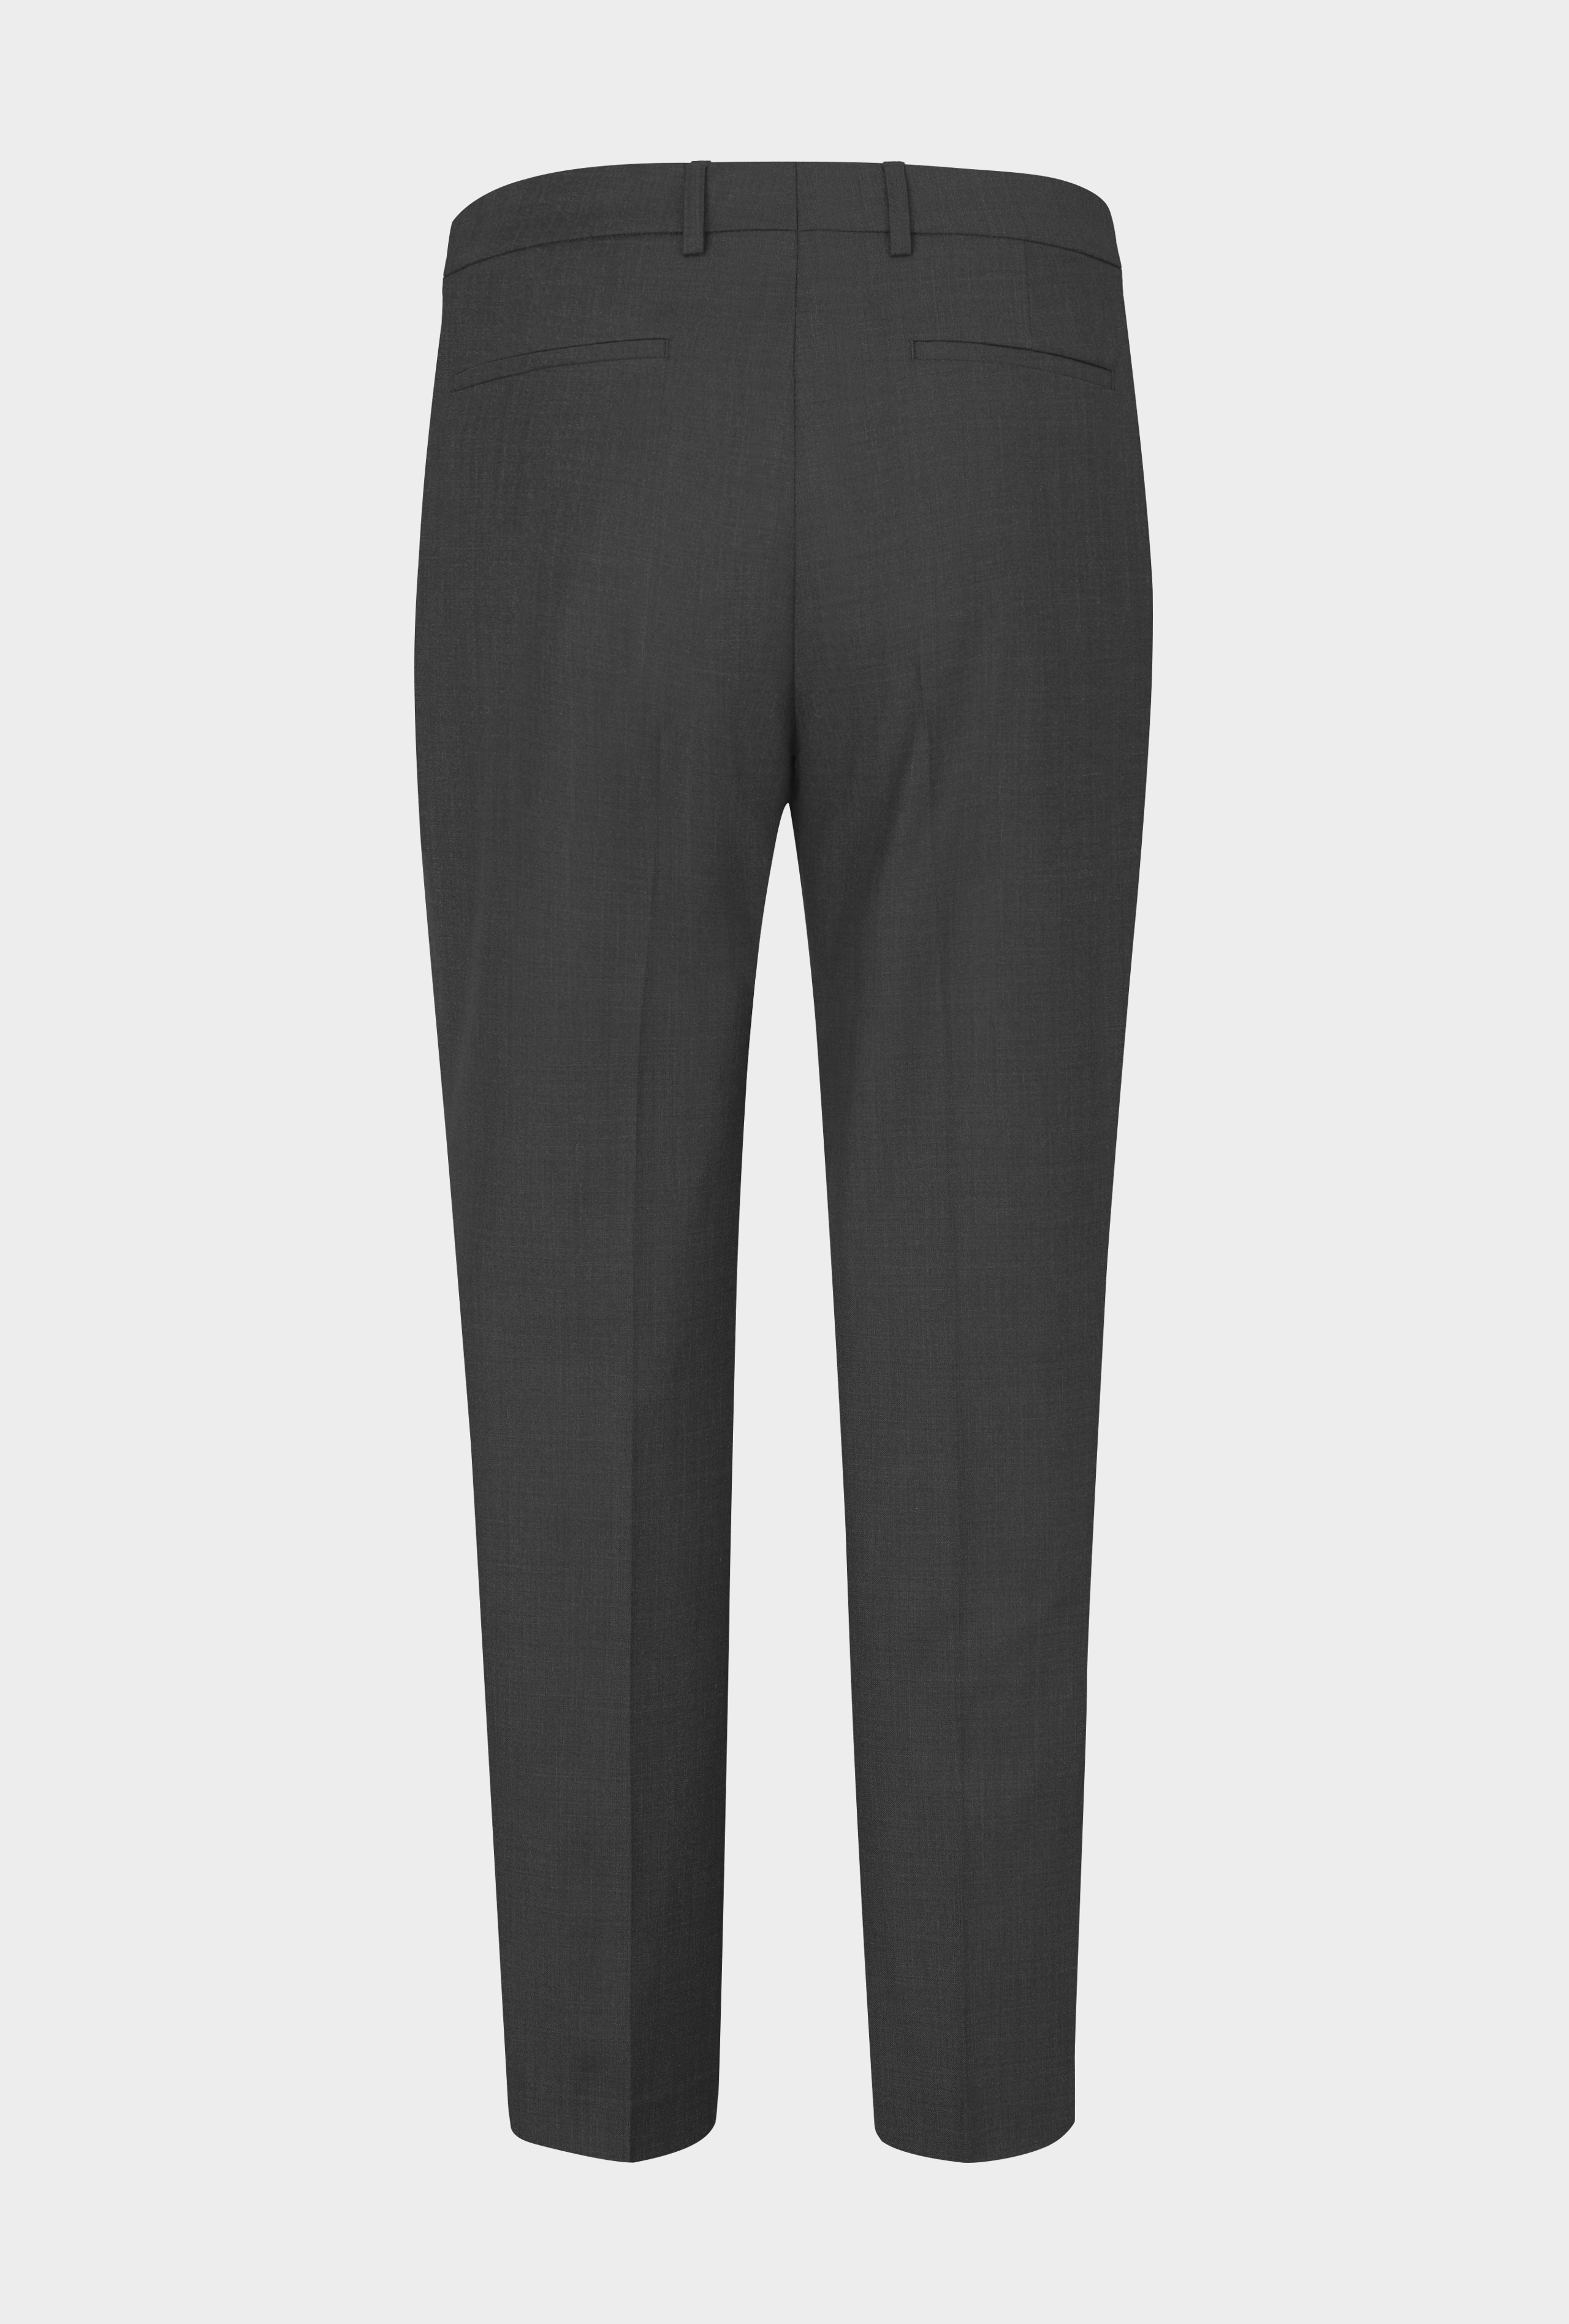 Ladies trousers Petra | Ted Bernhardtz – At Work collection shop